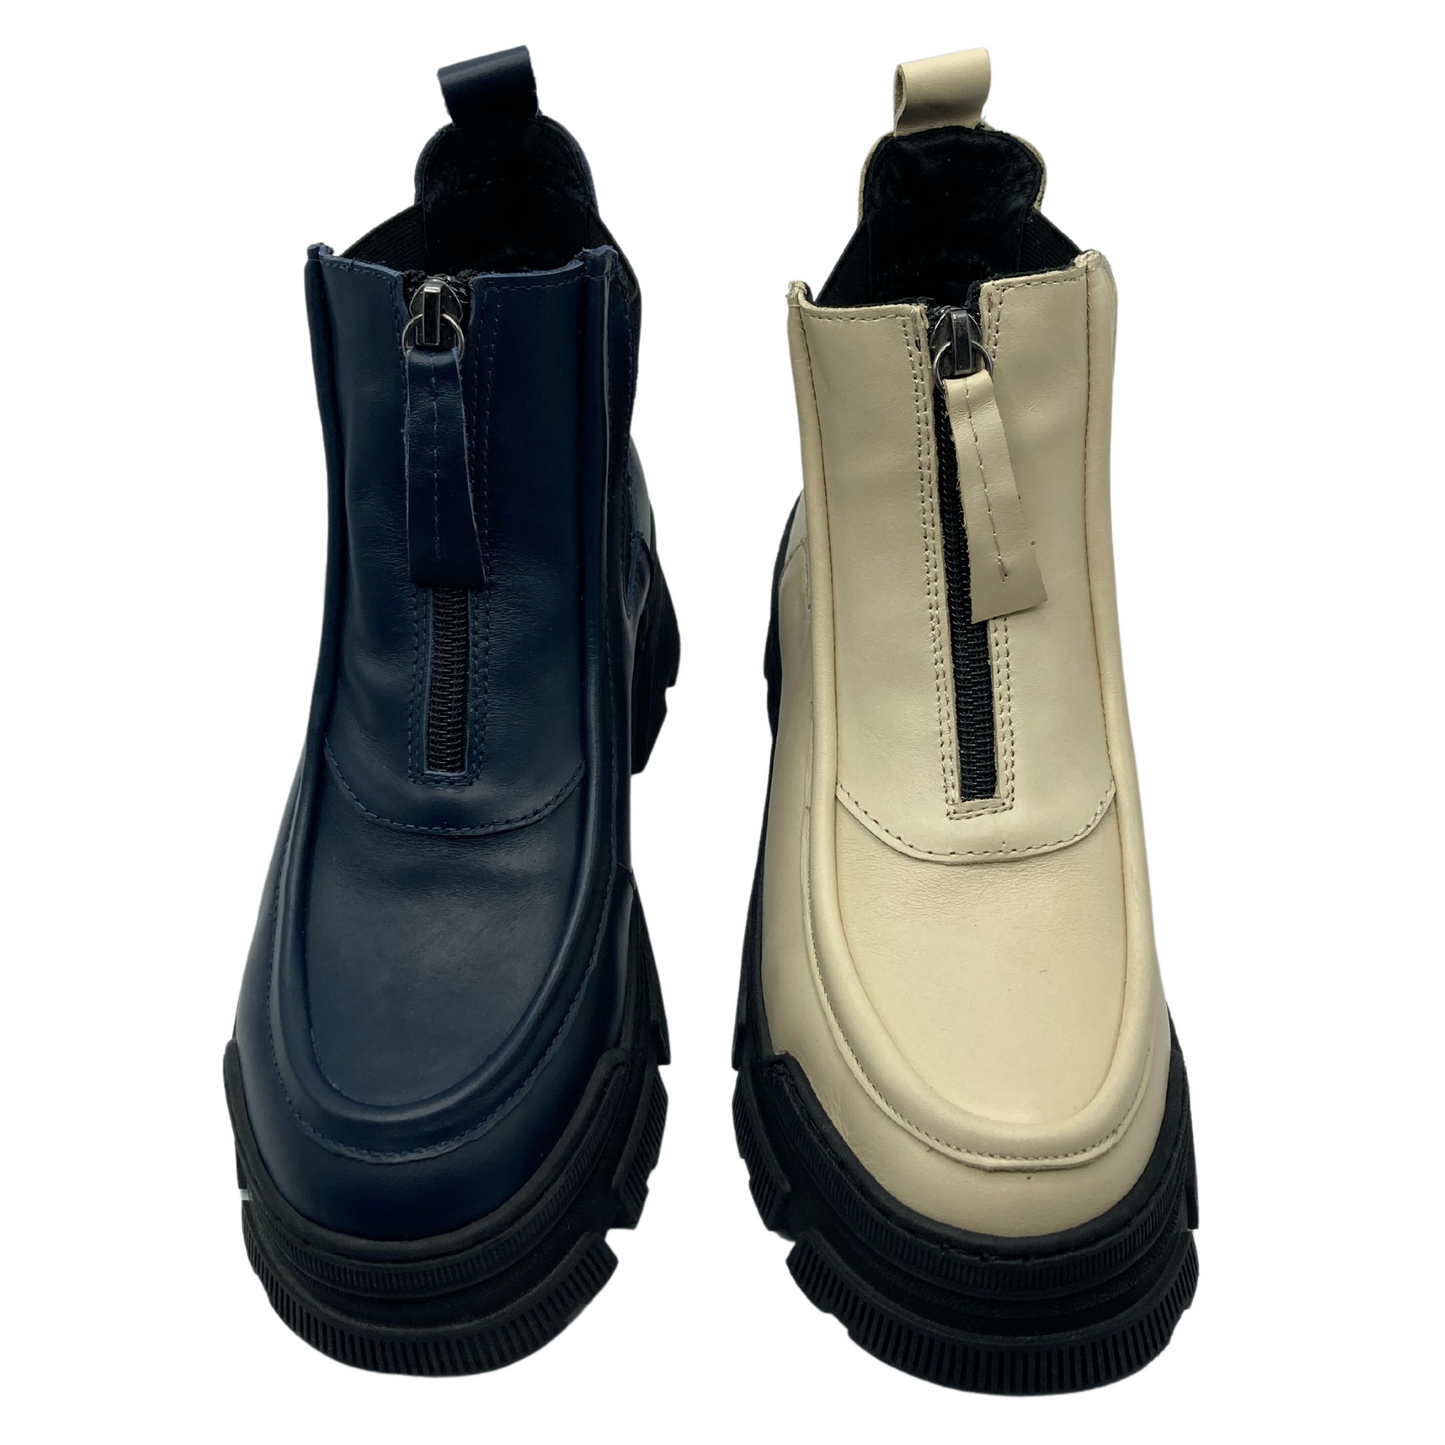 View of a pair of leather short boots one blue and one beige. Both with chunky black rubber outsoles and black upper zippers